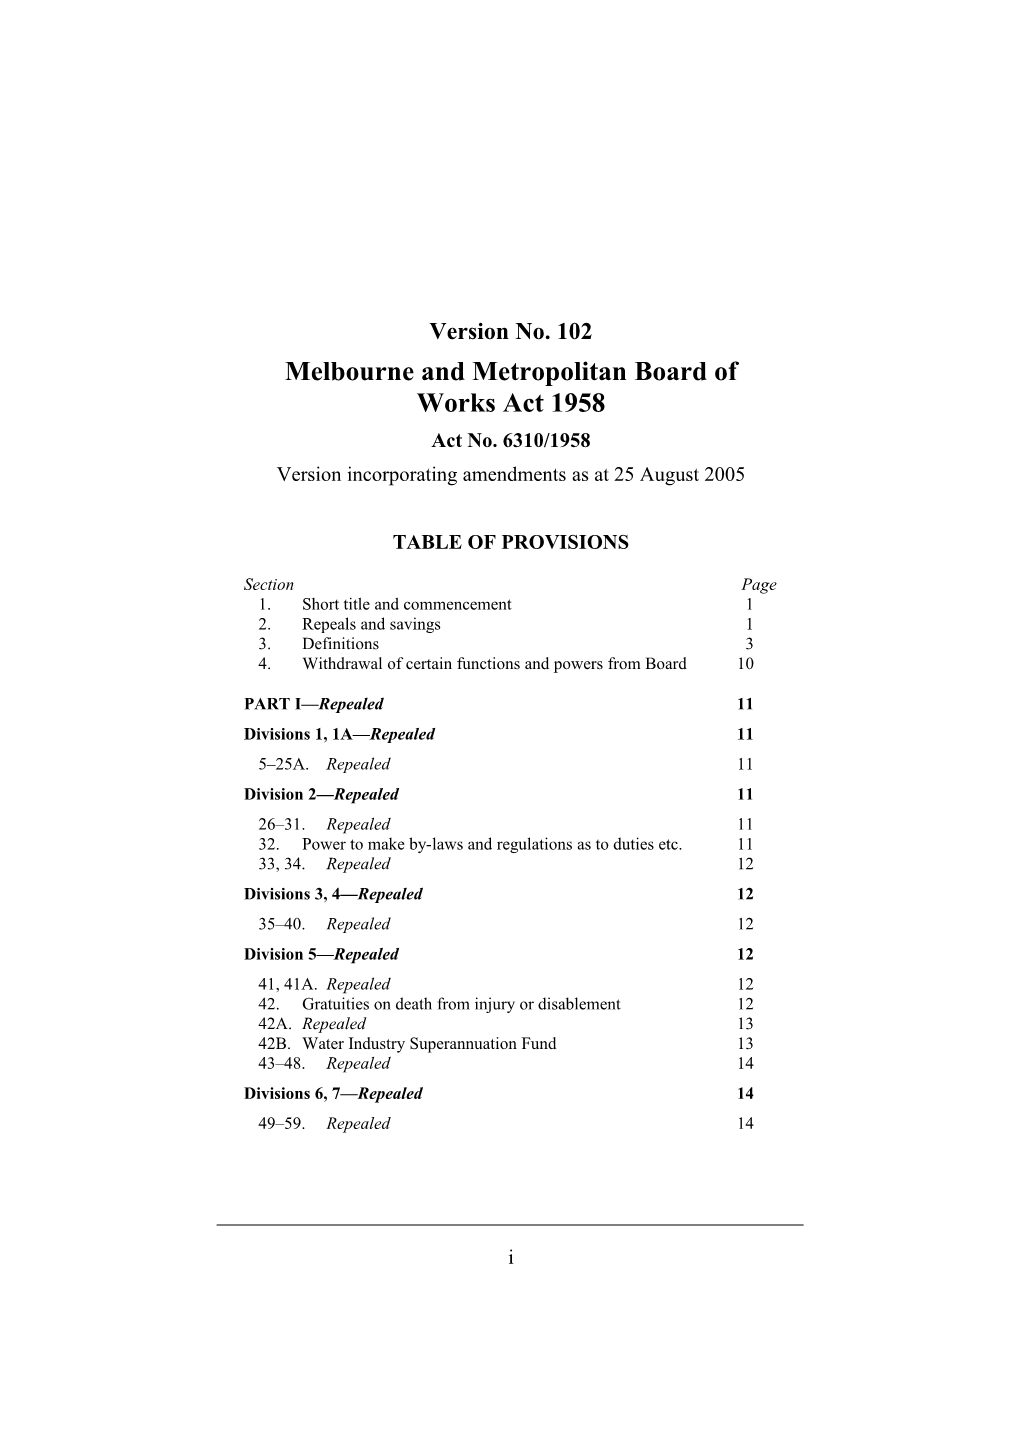 Melbourne and Metropolitan Board of Works Act 1958